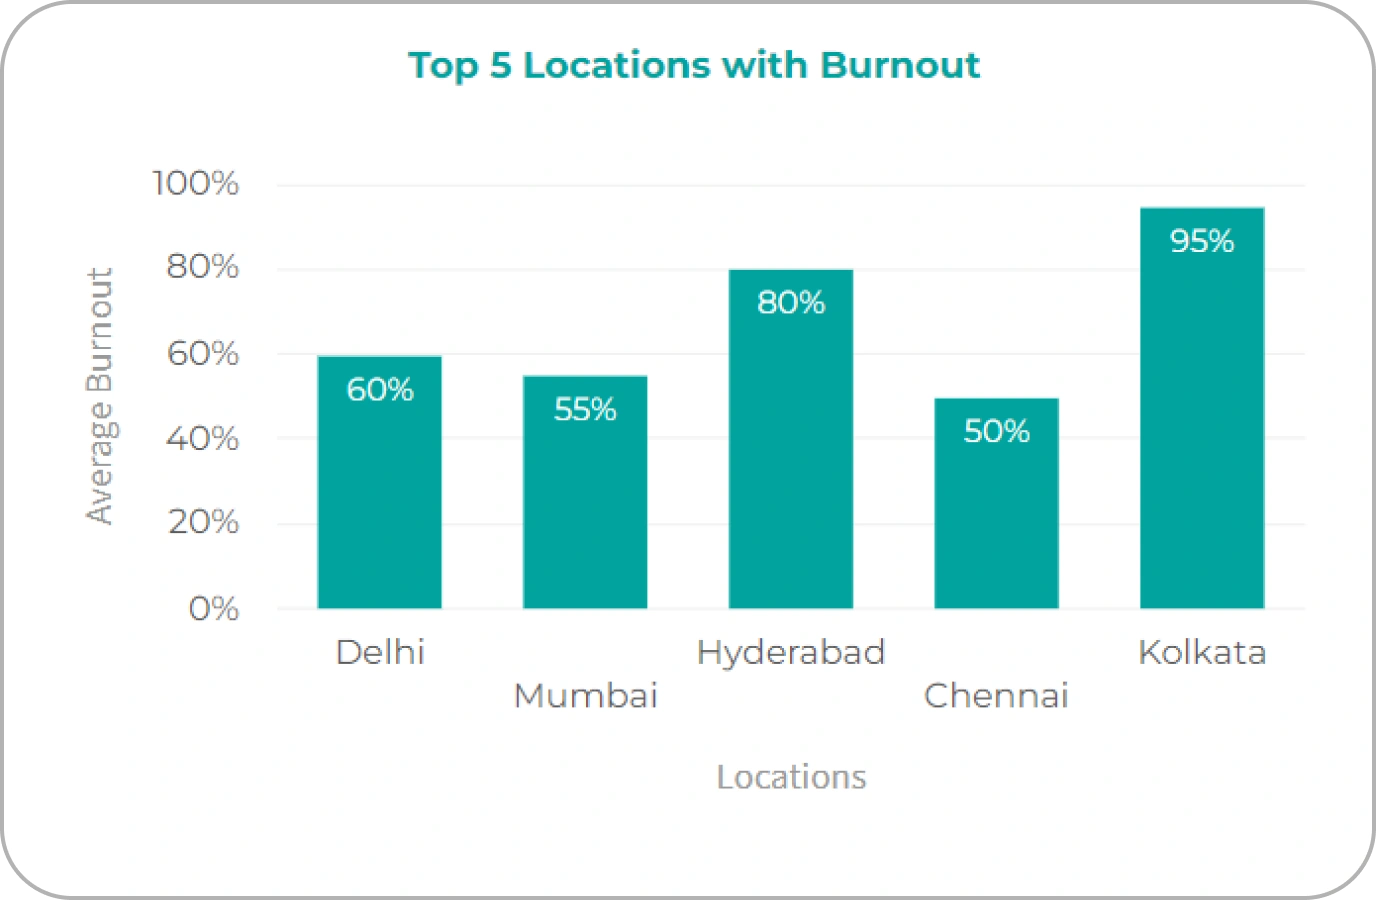 Top 5 location with burnout